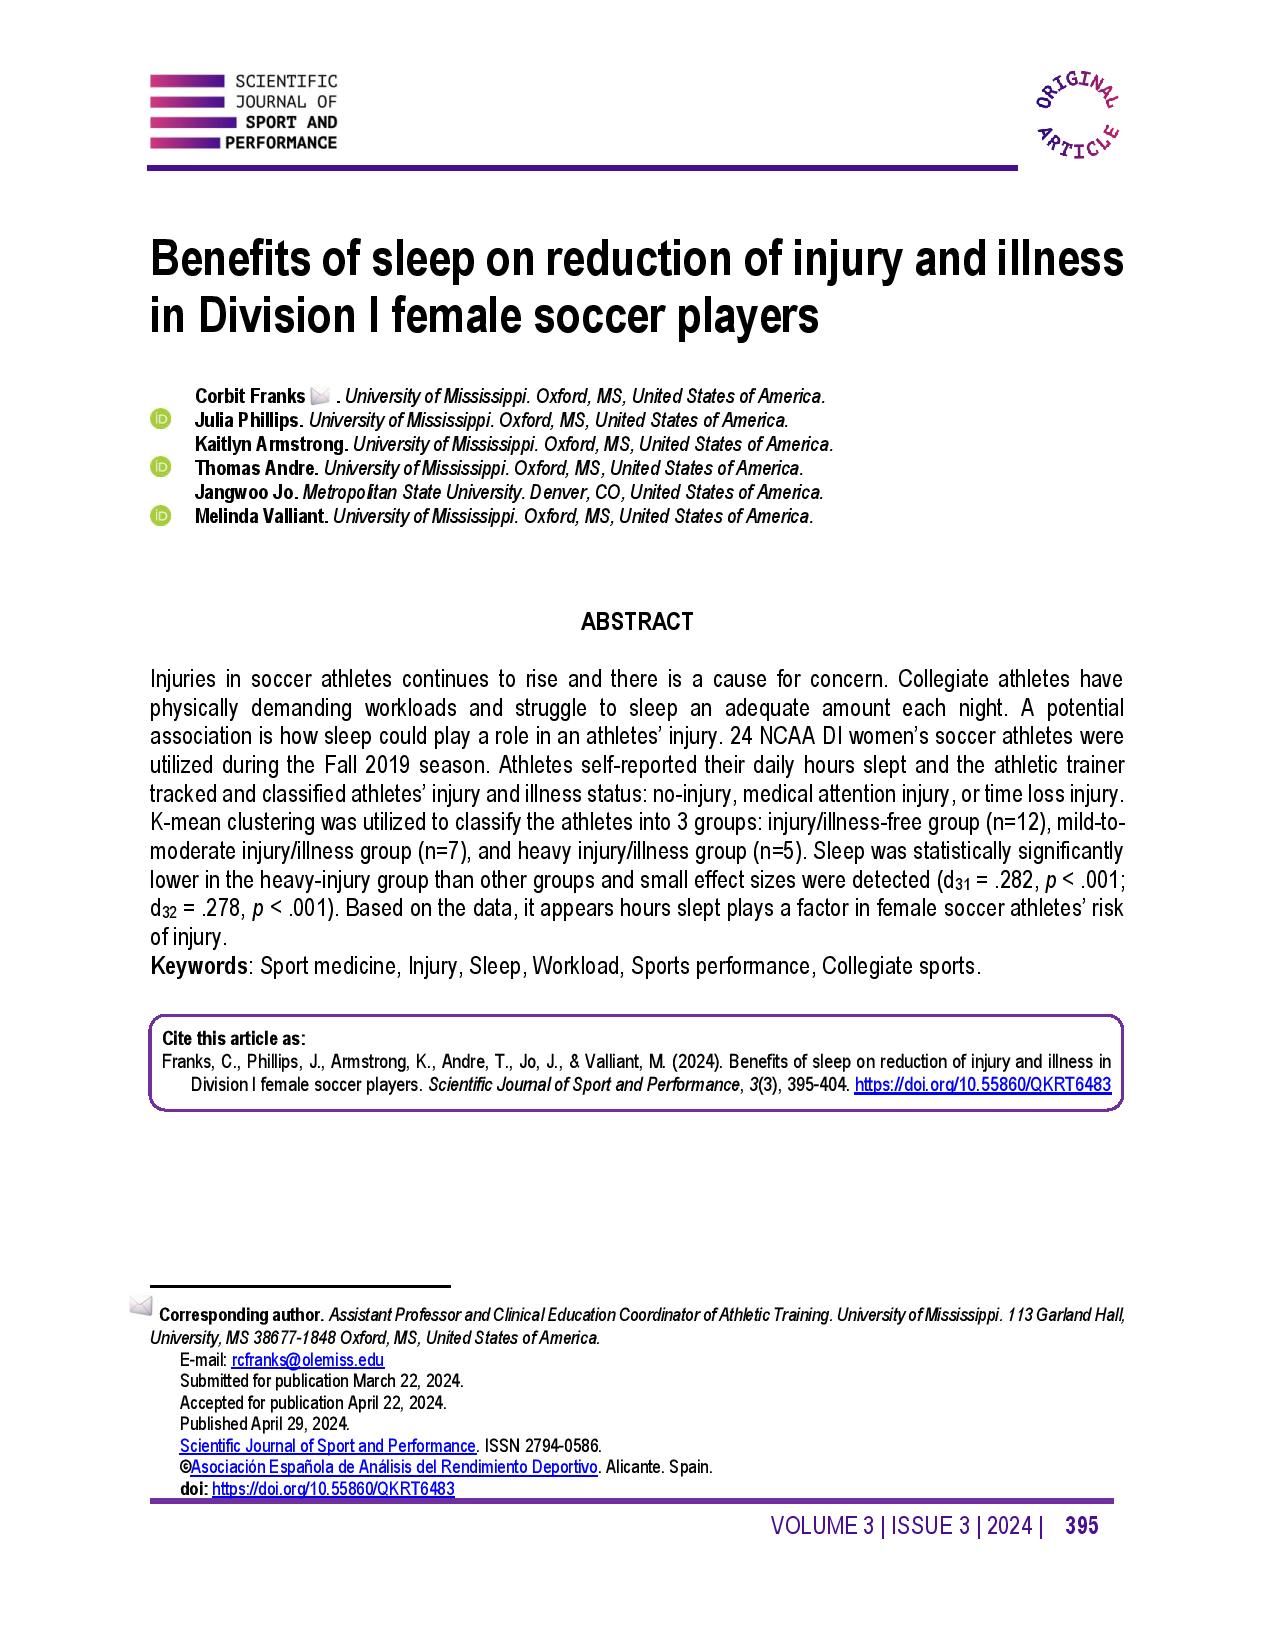 Benefits of sleep on reduction of injury and illness in Division I female soccer players